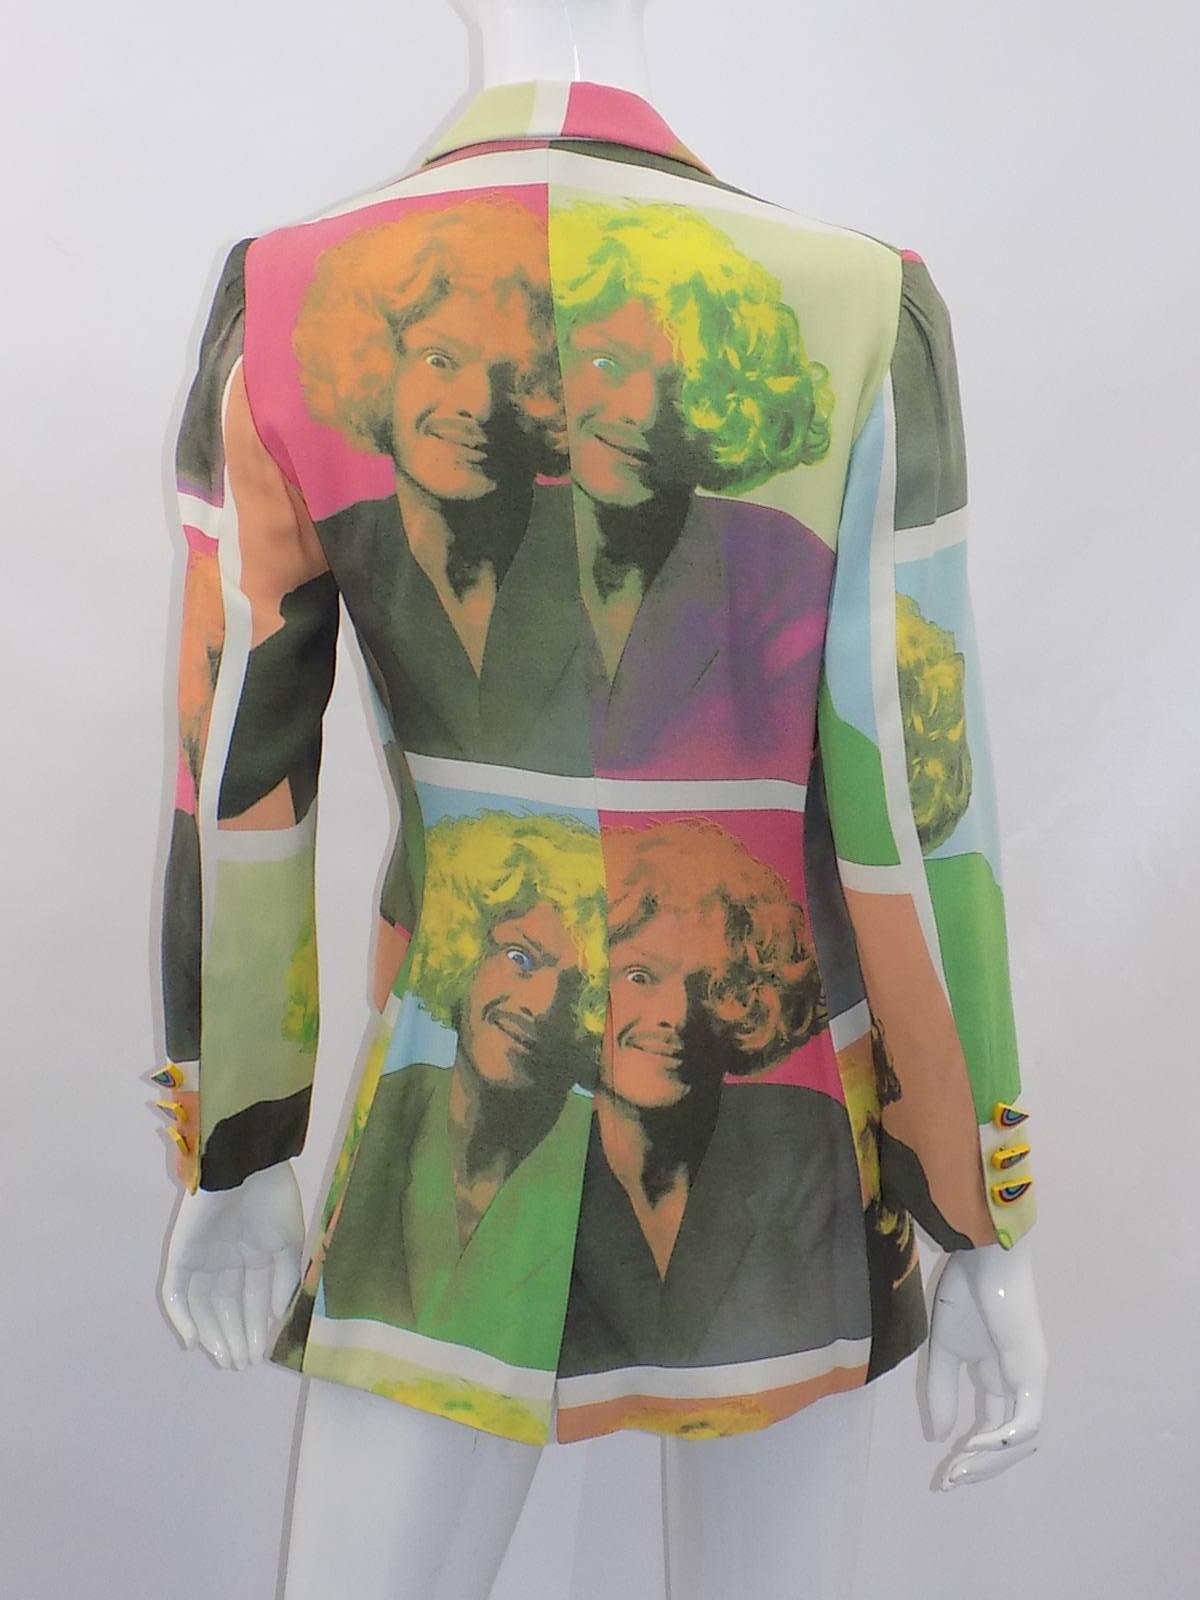 This  Cheap and Chic psychedelic Andy Warhol  spotlighting Moschino's bizarre sense of humor, is where he excels.

Collection 1989-1990  featuring Andy Warhol 